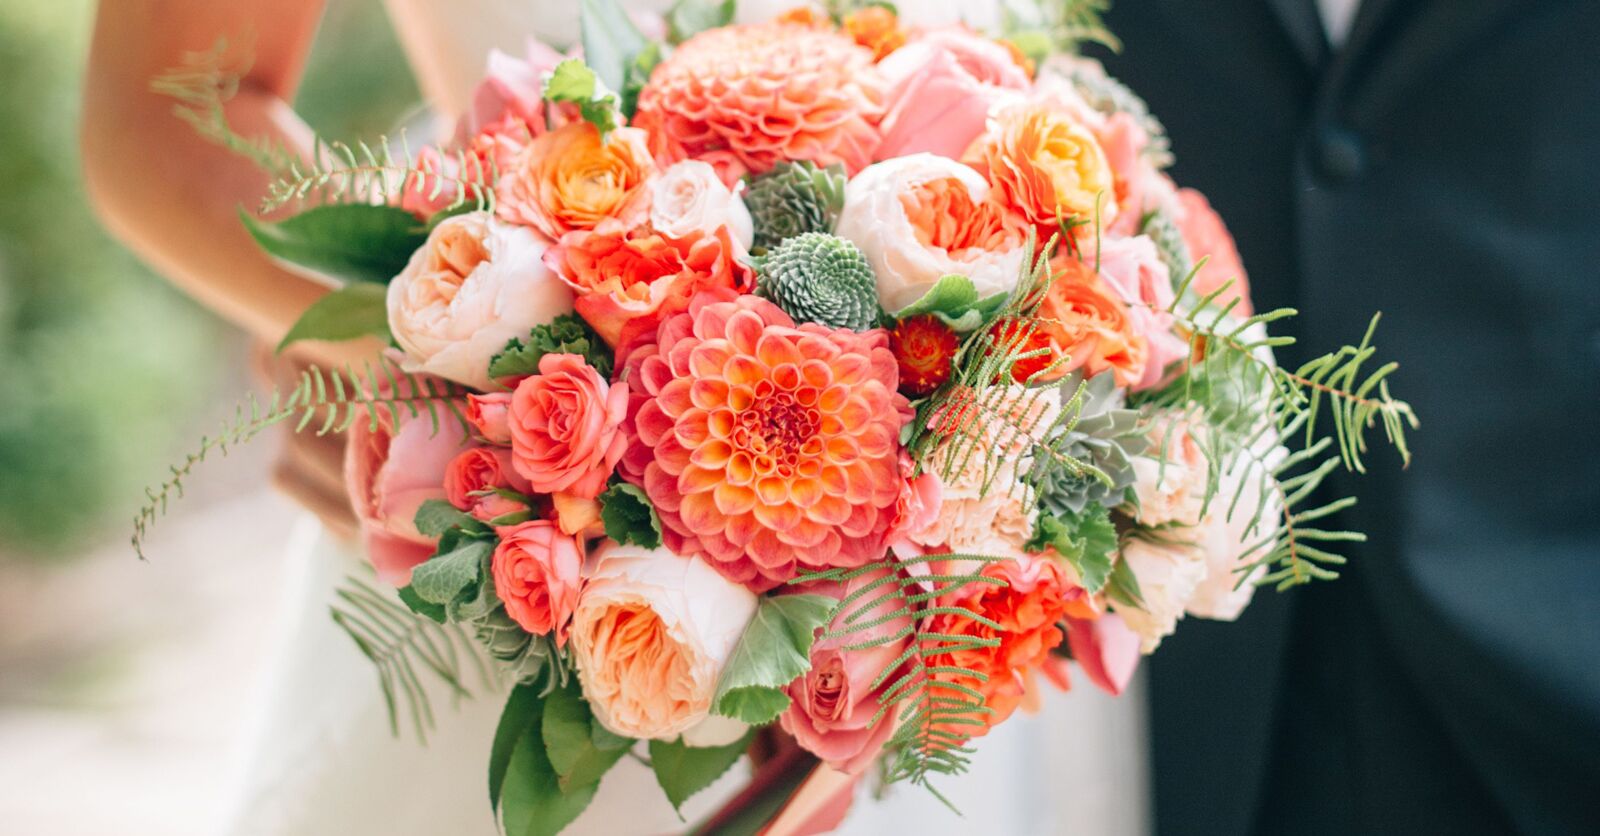 Wedding Flower Guide With Season Color And Price Details